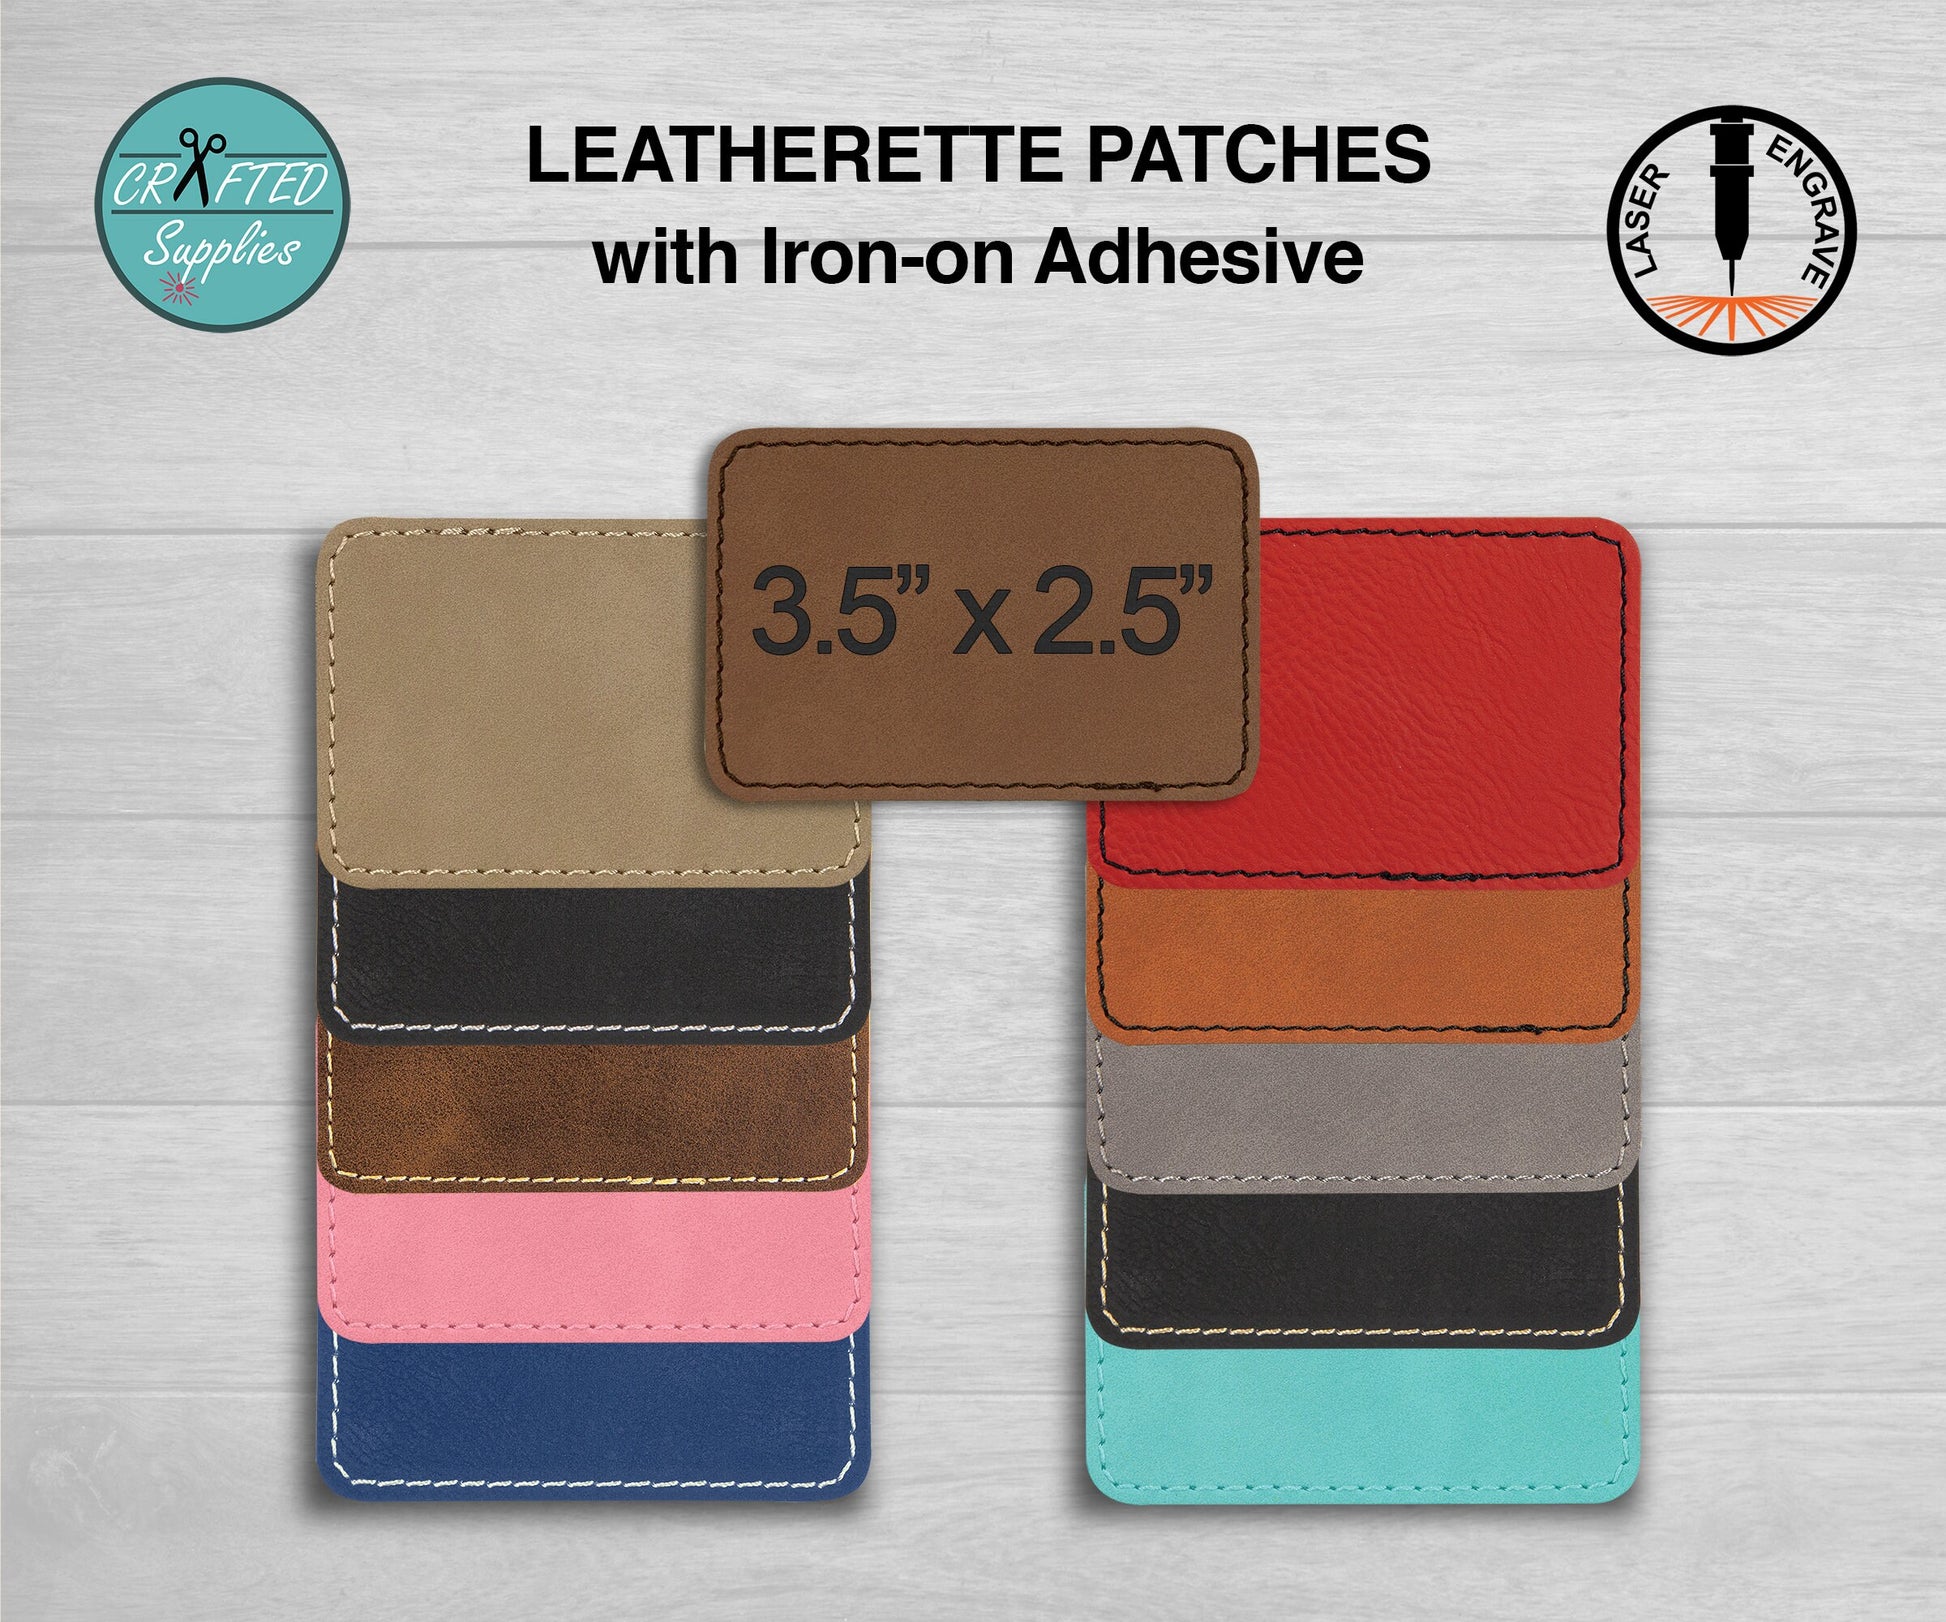 Leatherette Patch, LG Rectangle 3.5 in x 2.5 in – CraftedSupplies